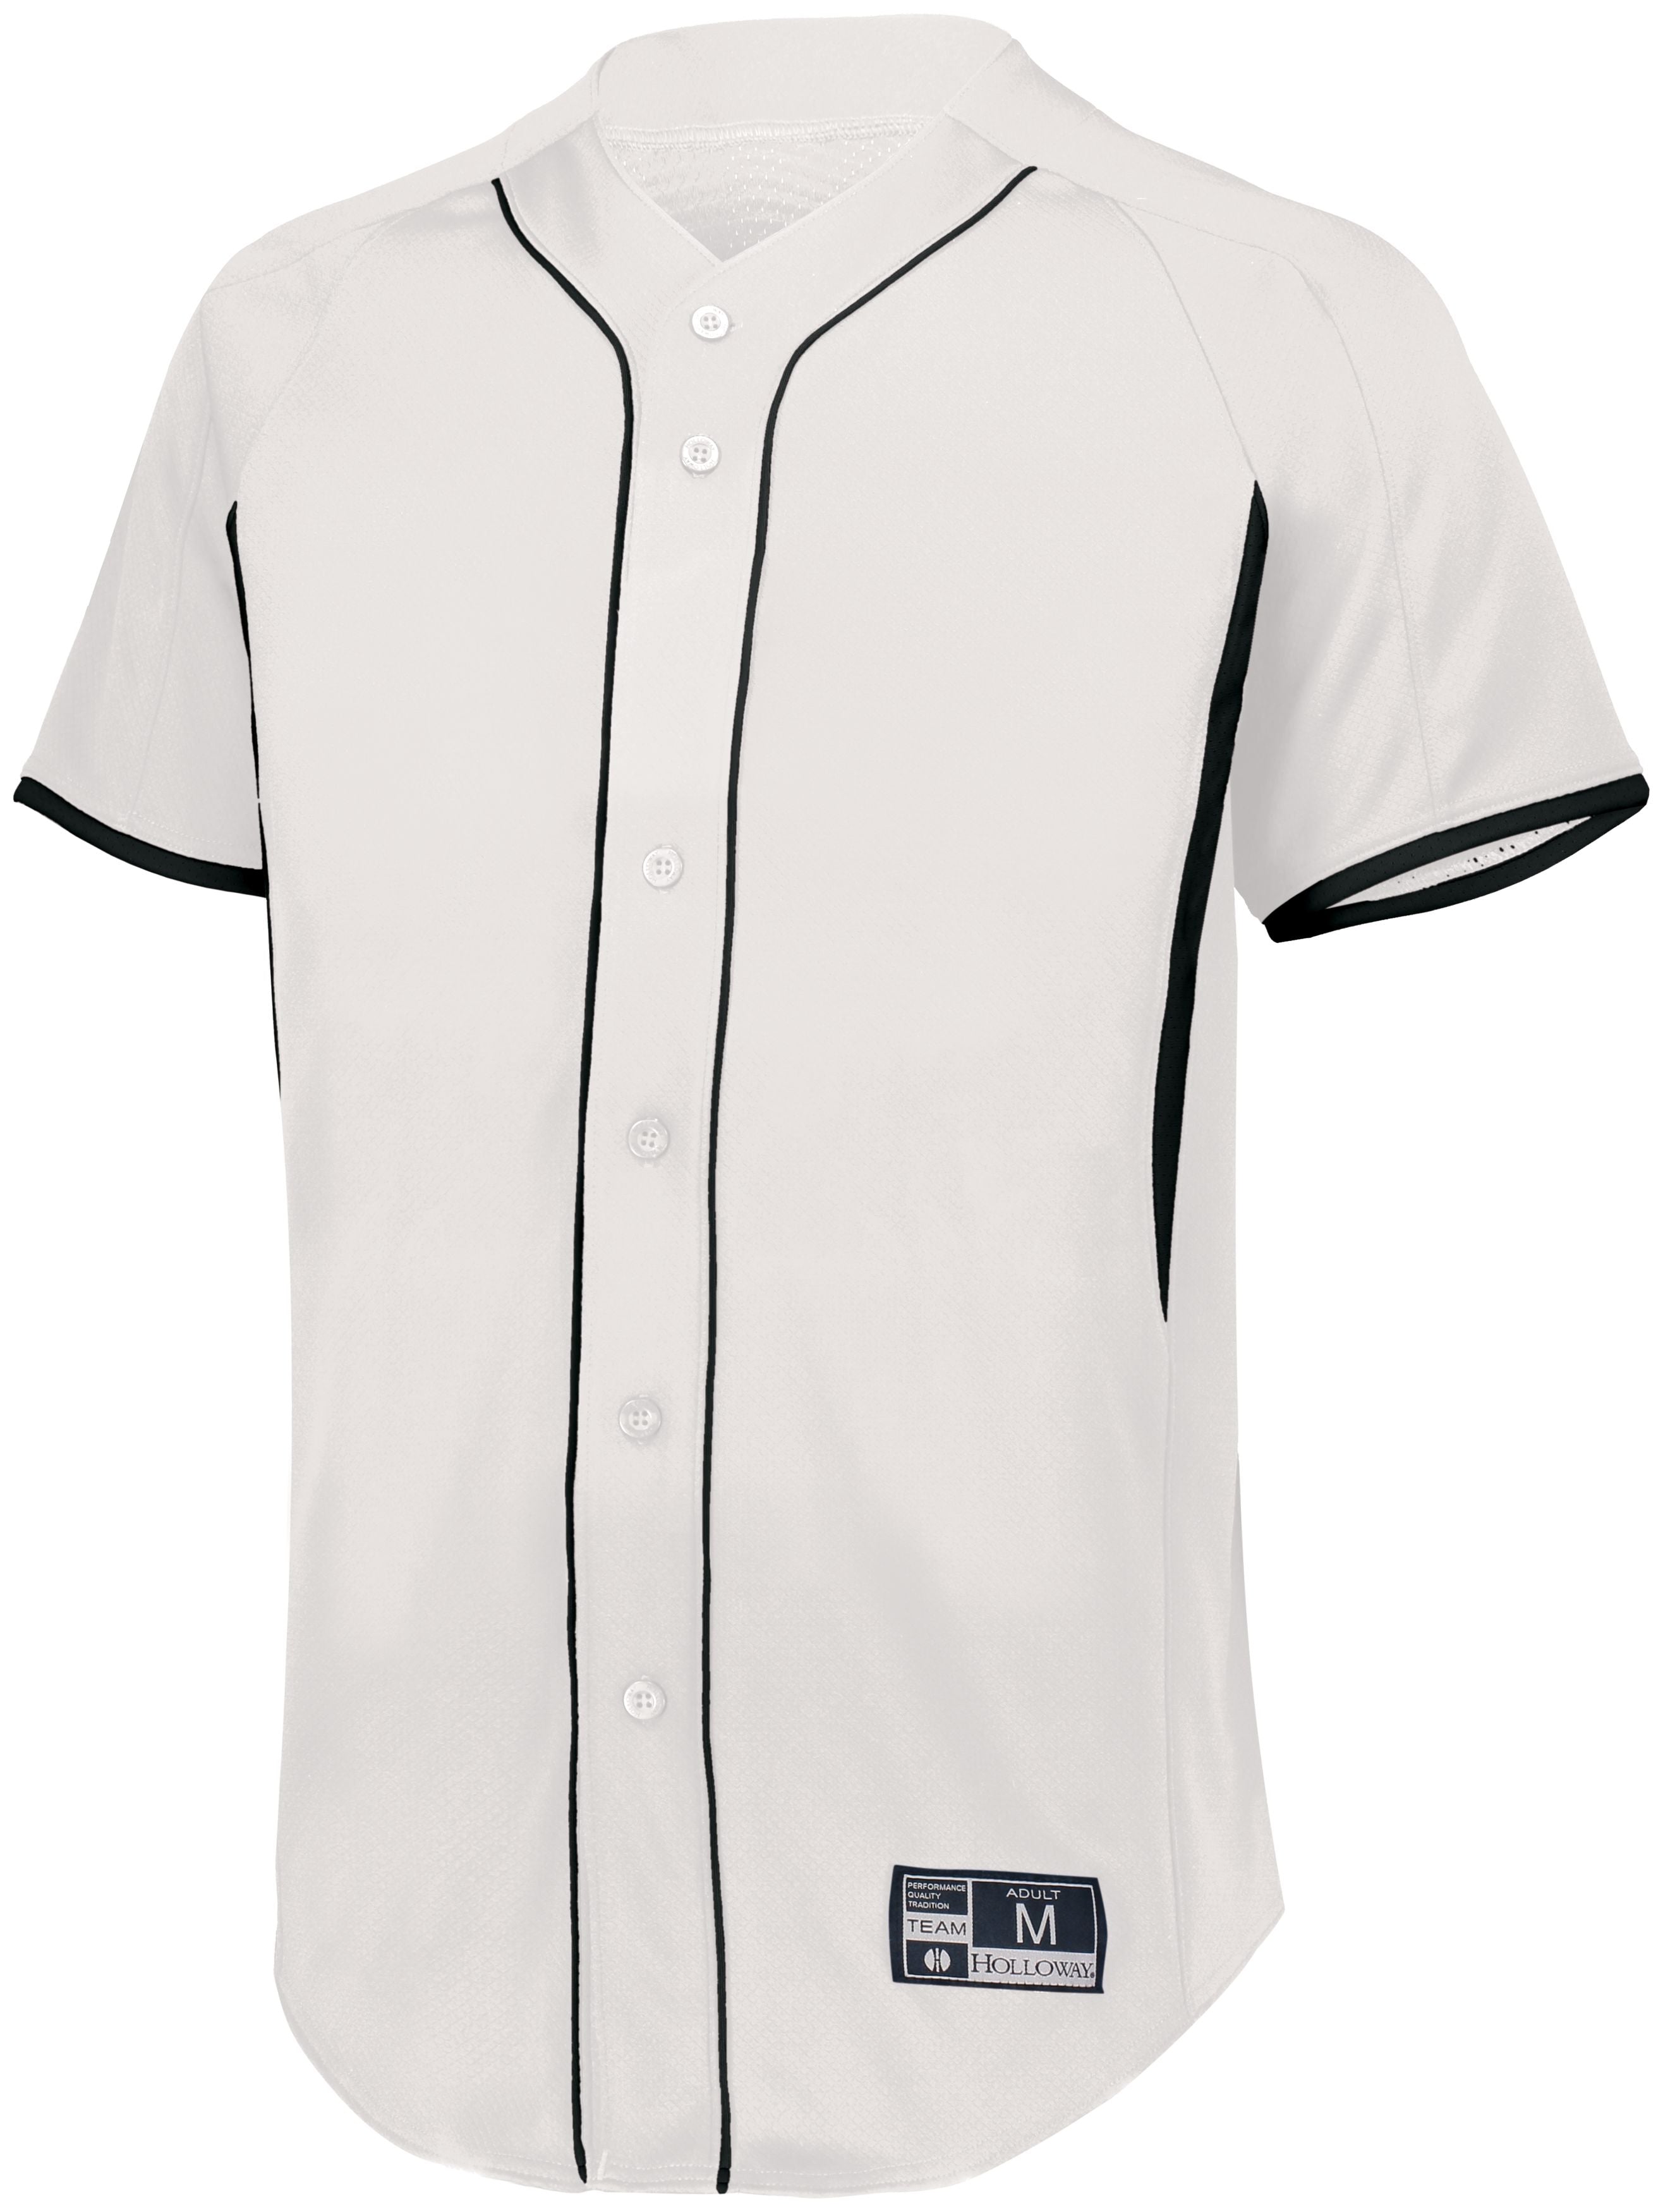 Holloway Game7 Full-Button Baseball Jersey in White/Black  -Part of the Adult, Adult-Jersey, Baseball, Holloway, Shirts, All-Sports, All-Sports-1 product lines at KanaleyCreations.com